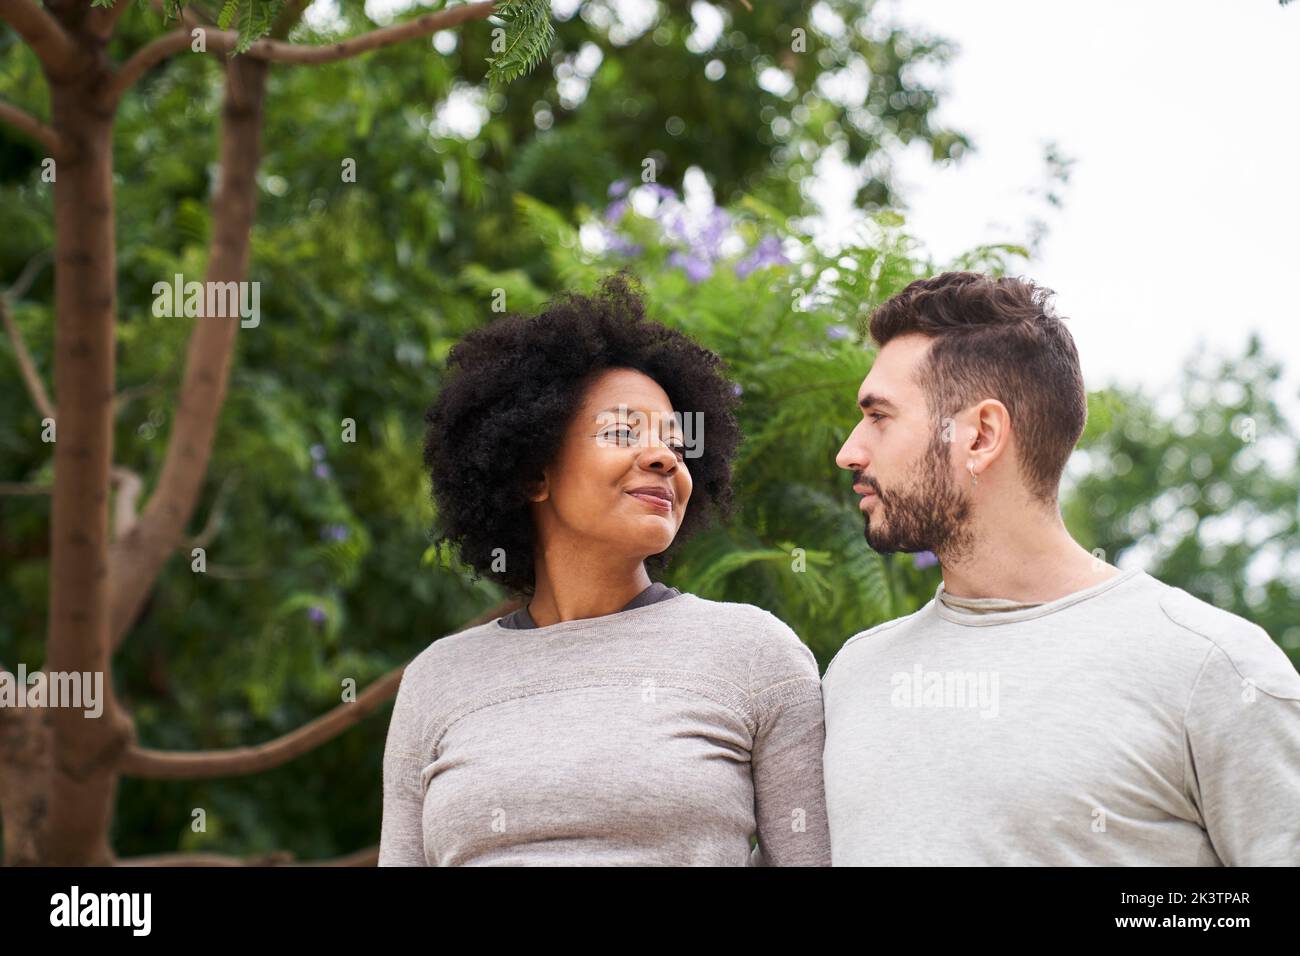 Mid-shot portrait of an African-American woman and Caucasian man looking at each other and having a good time outdoors Stock Photo